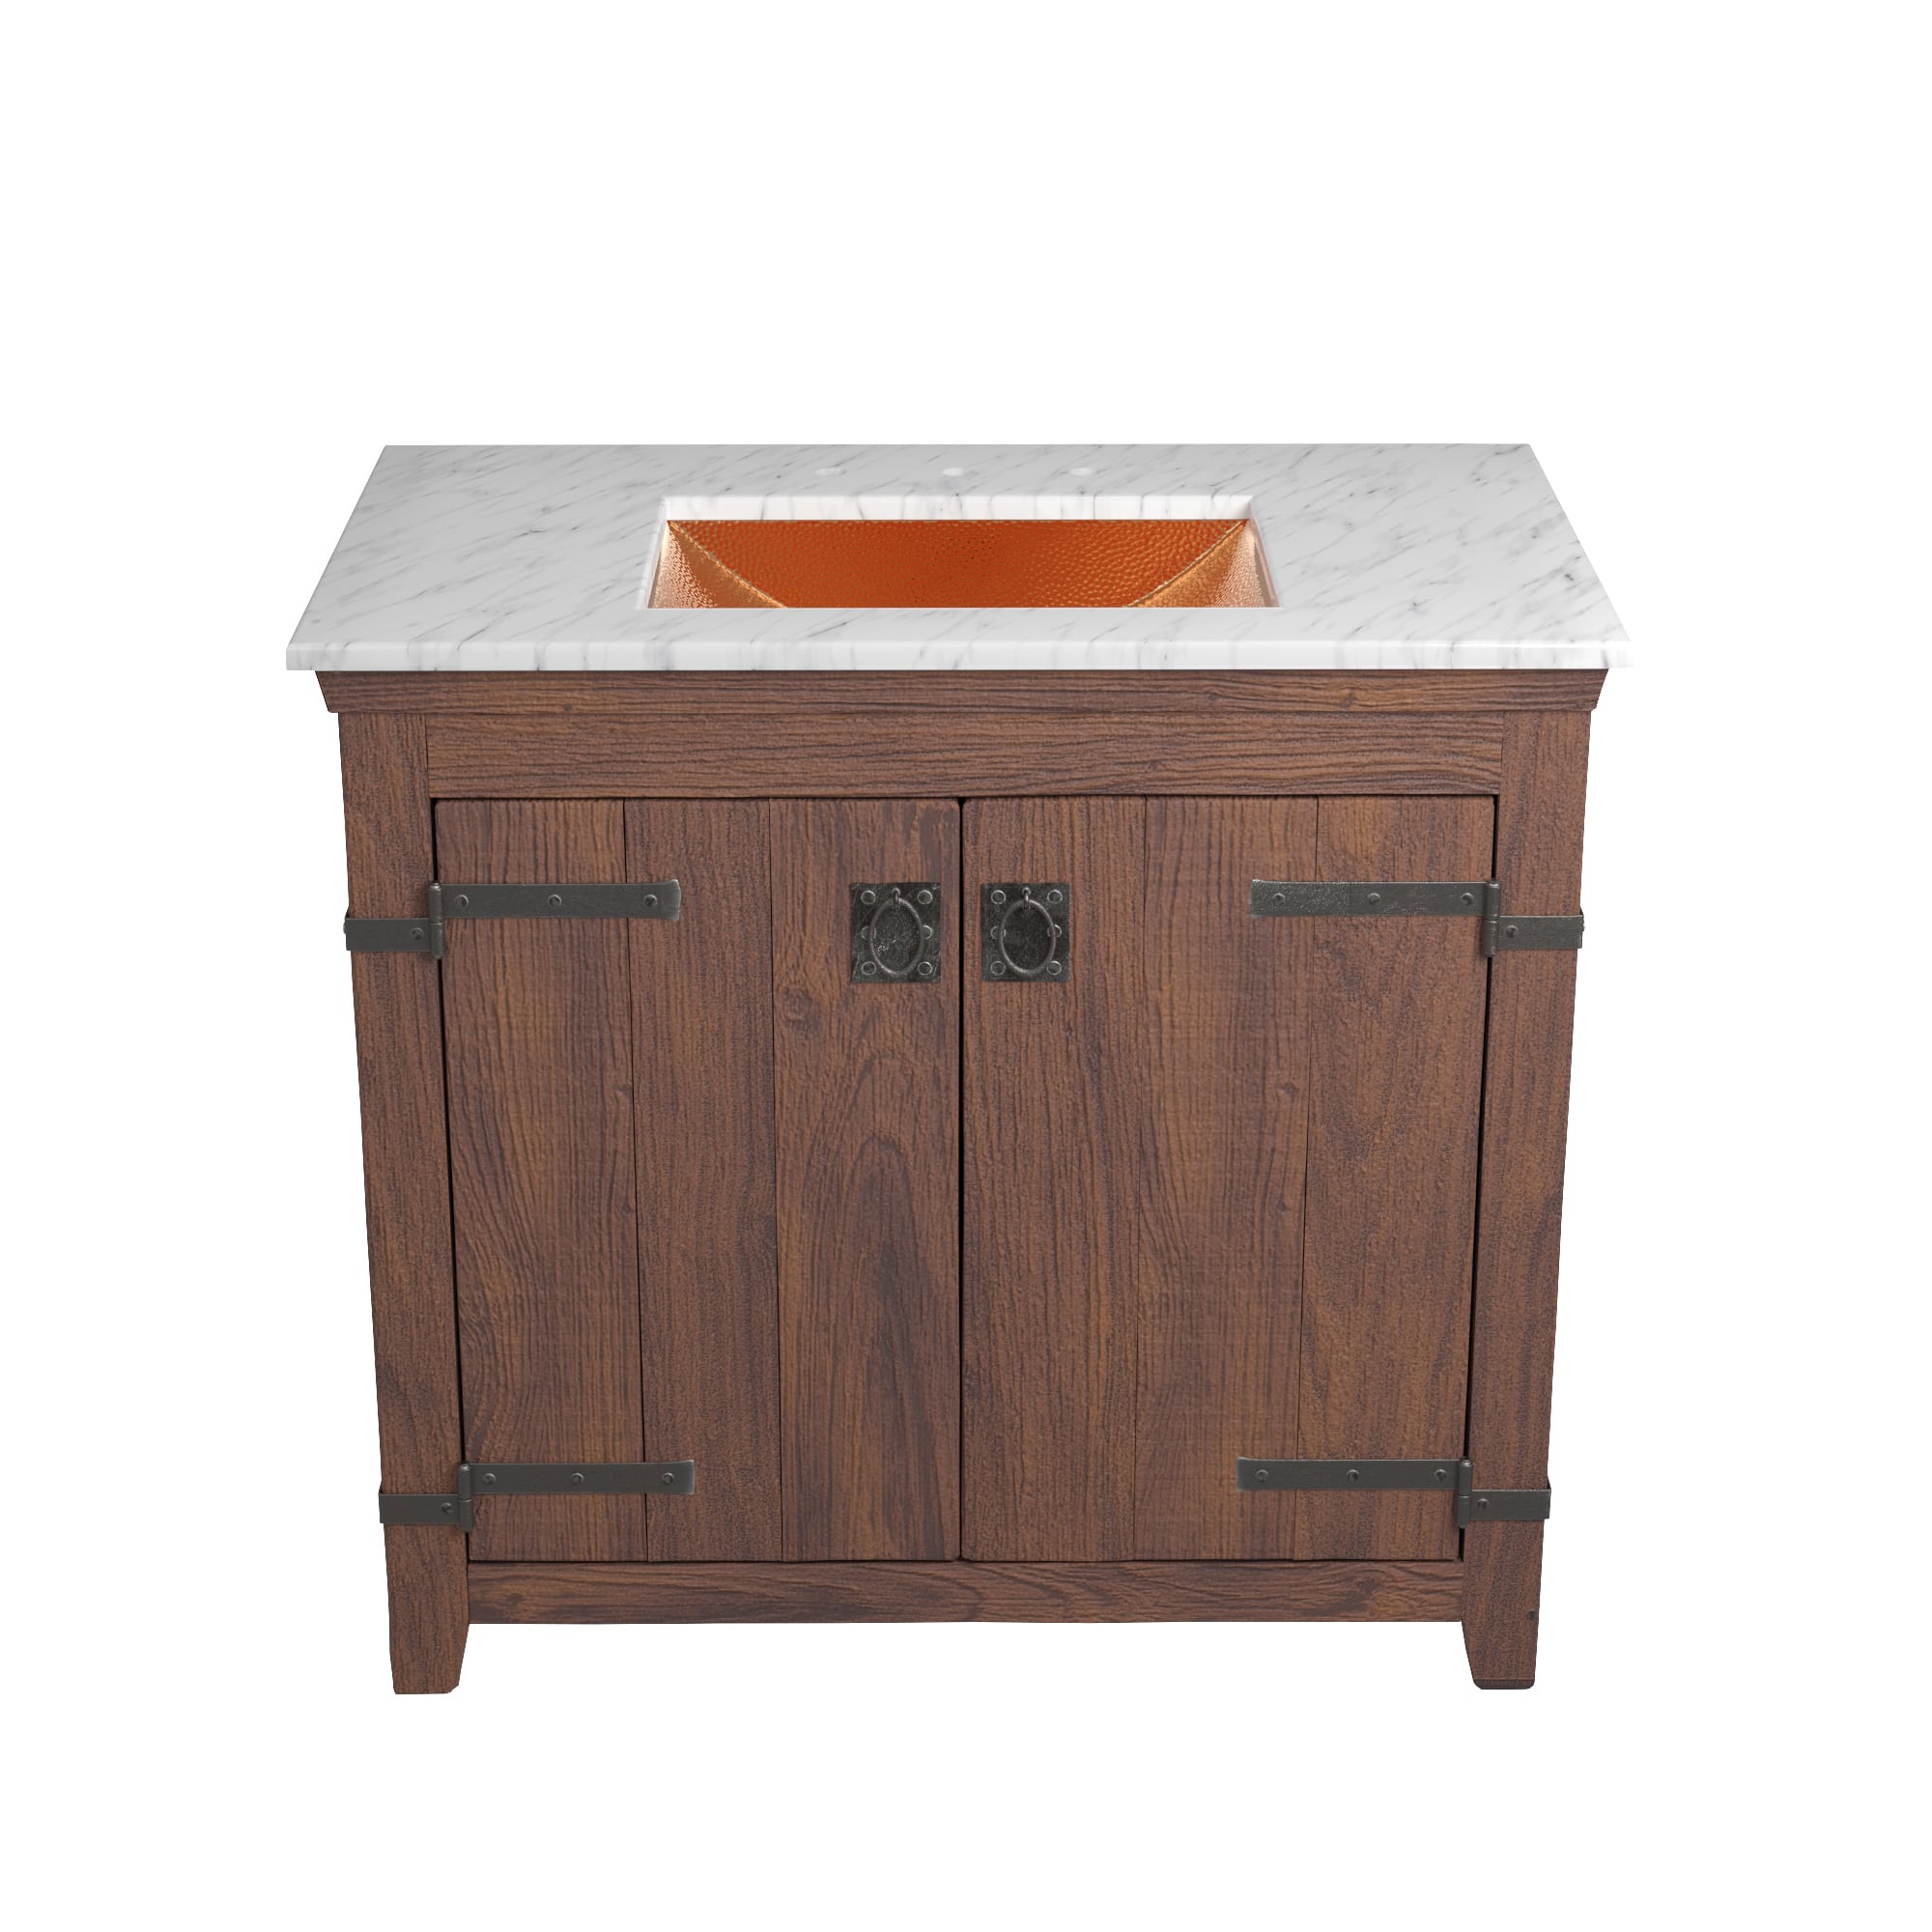 Native Trails 36" Americana Vanity in Chestnut with Carrara Marble Top and Avila in Polished Copper, 8" Widespread Faucet Holes, BND36-VB-CT-CP-012